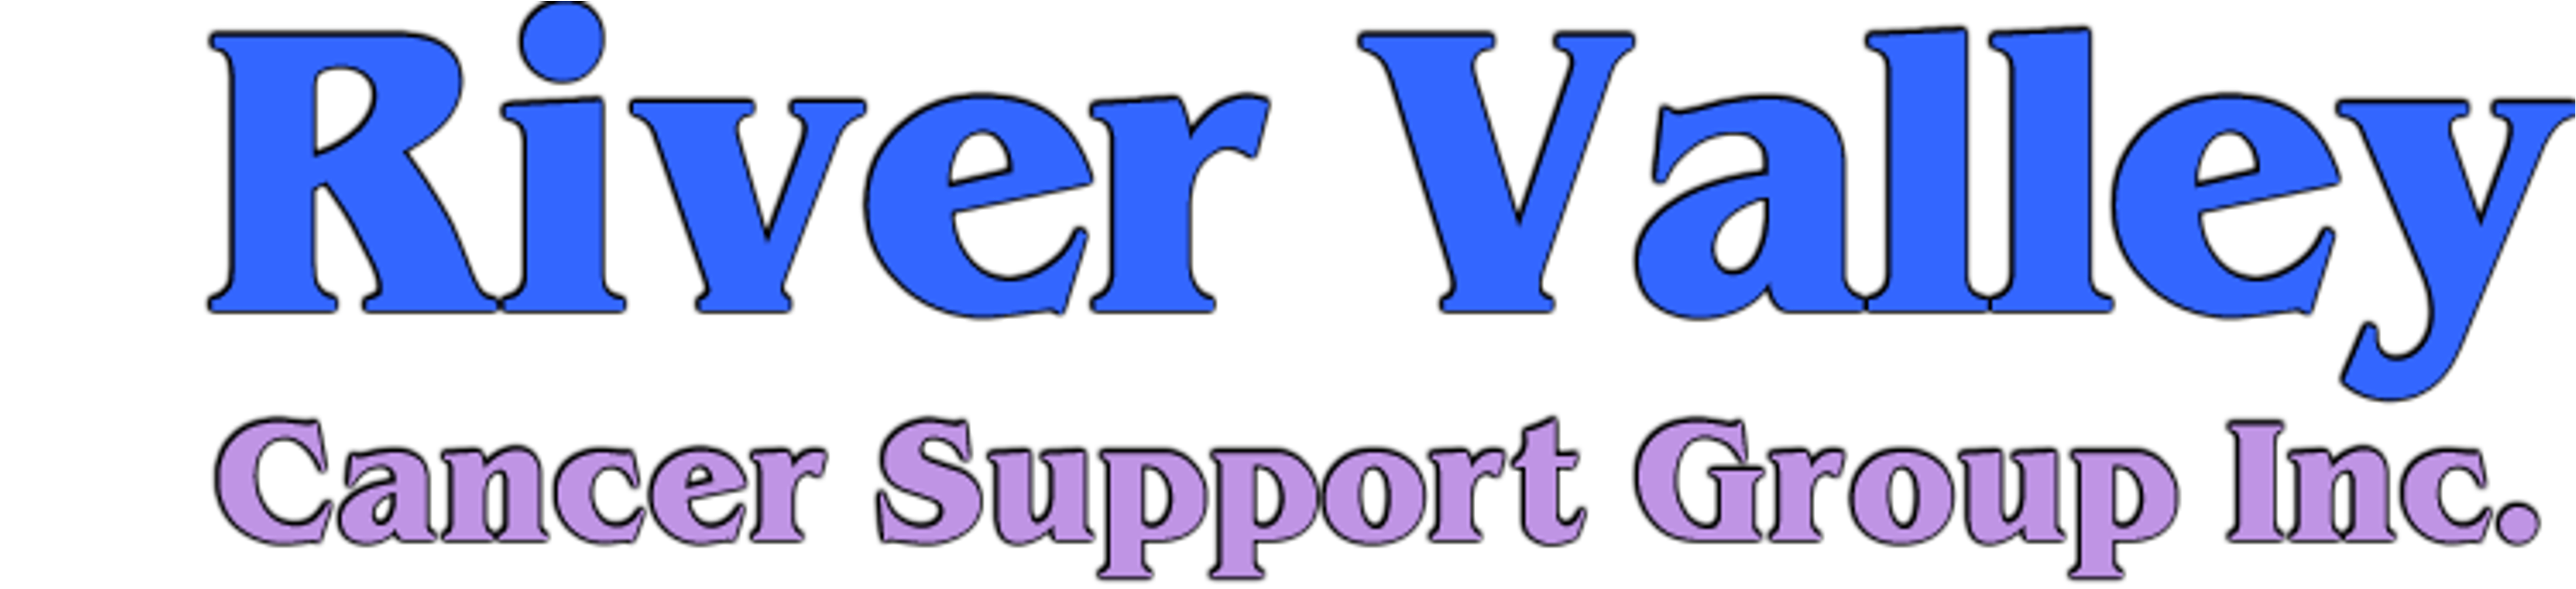 River Valley Cancer Support Group Inc.